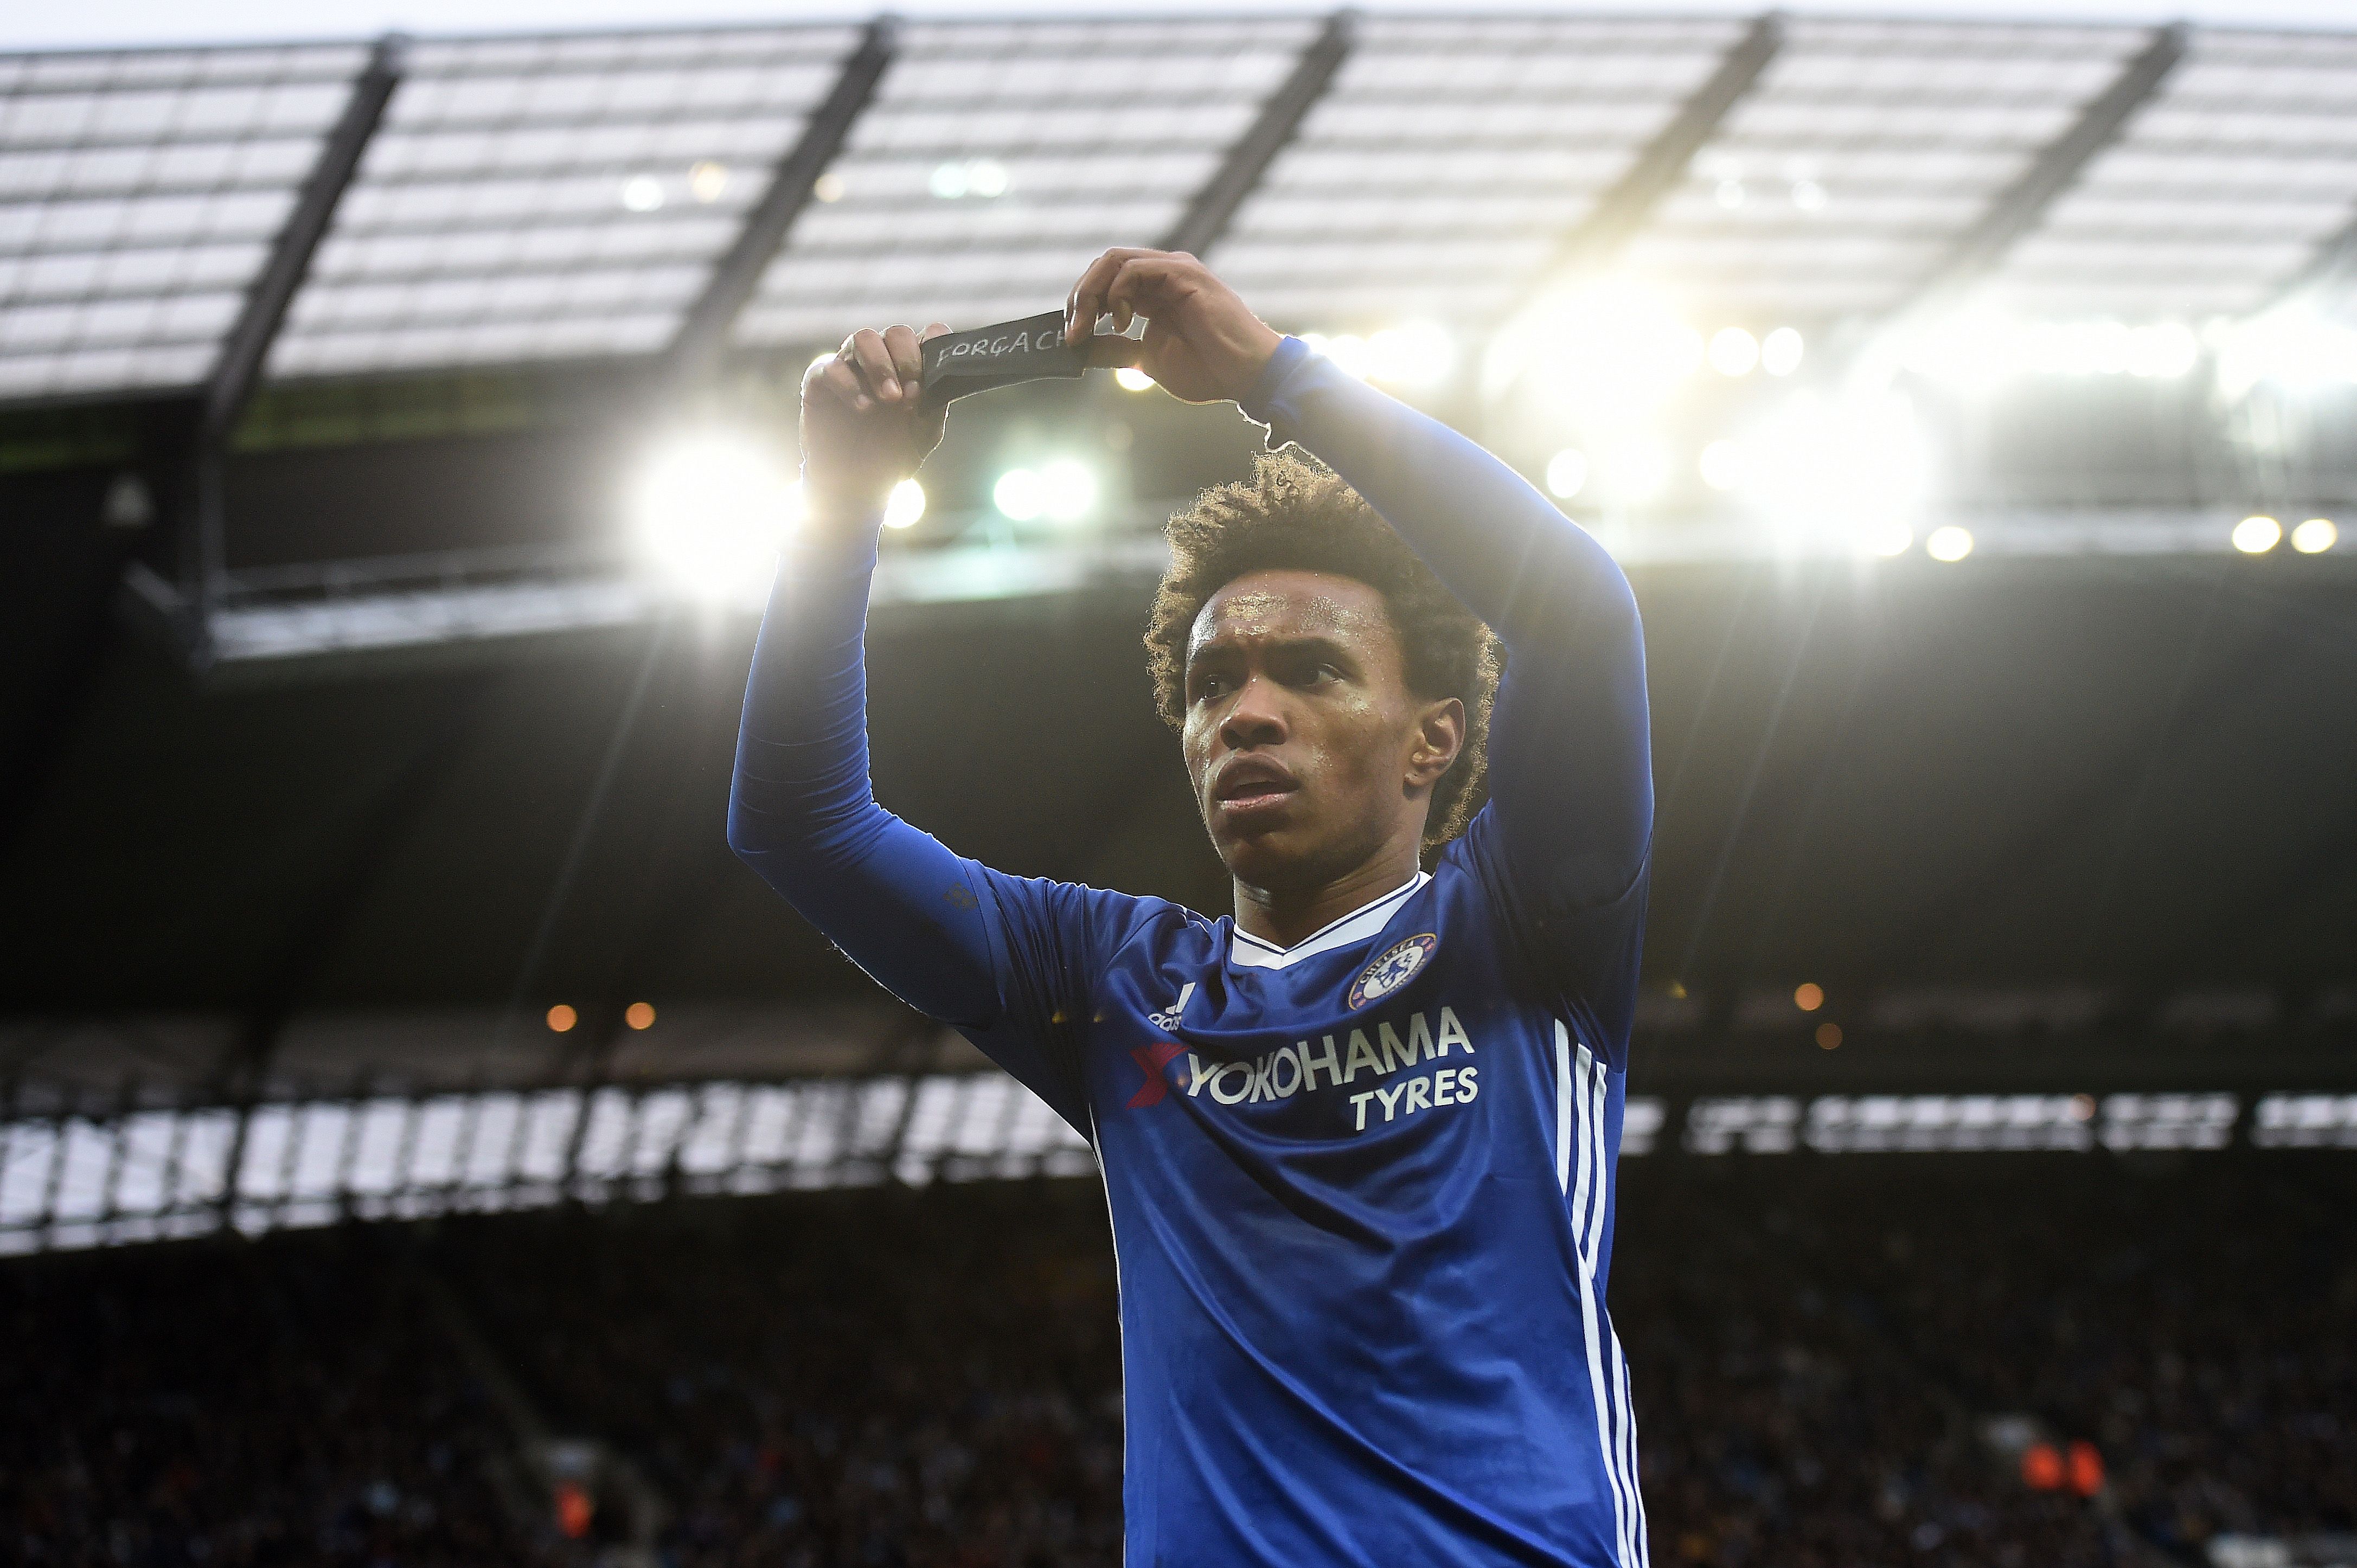 Chelsea's Brazilian midfielder Willian holds up his black armband as he celebrates scoring his team's second goal during the English Premier League football match between Manchester City and Chelsea at the Etihad Stadium in Manchester, north west England, on December 3, 2016.  / AFP / Paul ELLIS / RESTRICTED TO EDITORIAL USE. No use with unauthorized audio, video, data, fixture lists, club/league logos or 'live' services. Online in-match use limited to 75 images, no video emulation. No use in betting, games or single club/league/player publications.  /         (Photo credit should read PAUL ELLIS/AFP/Getty Images)